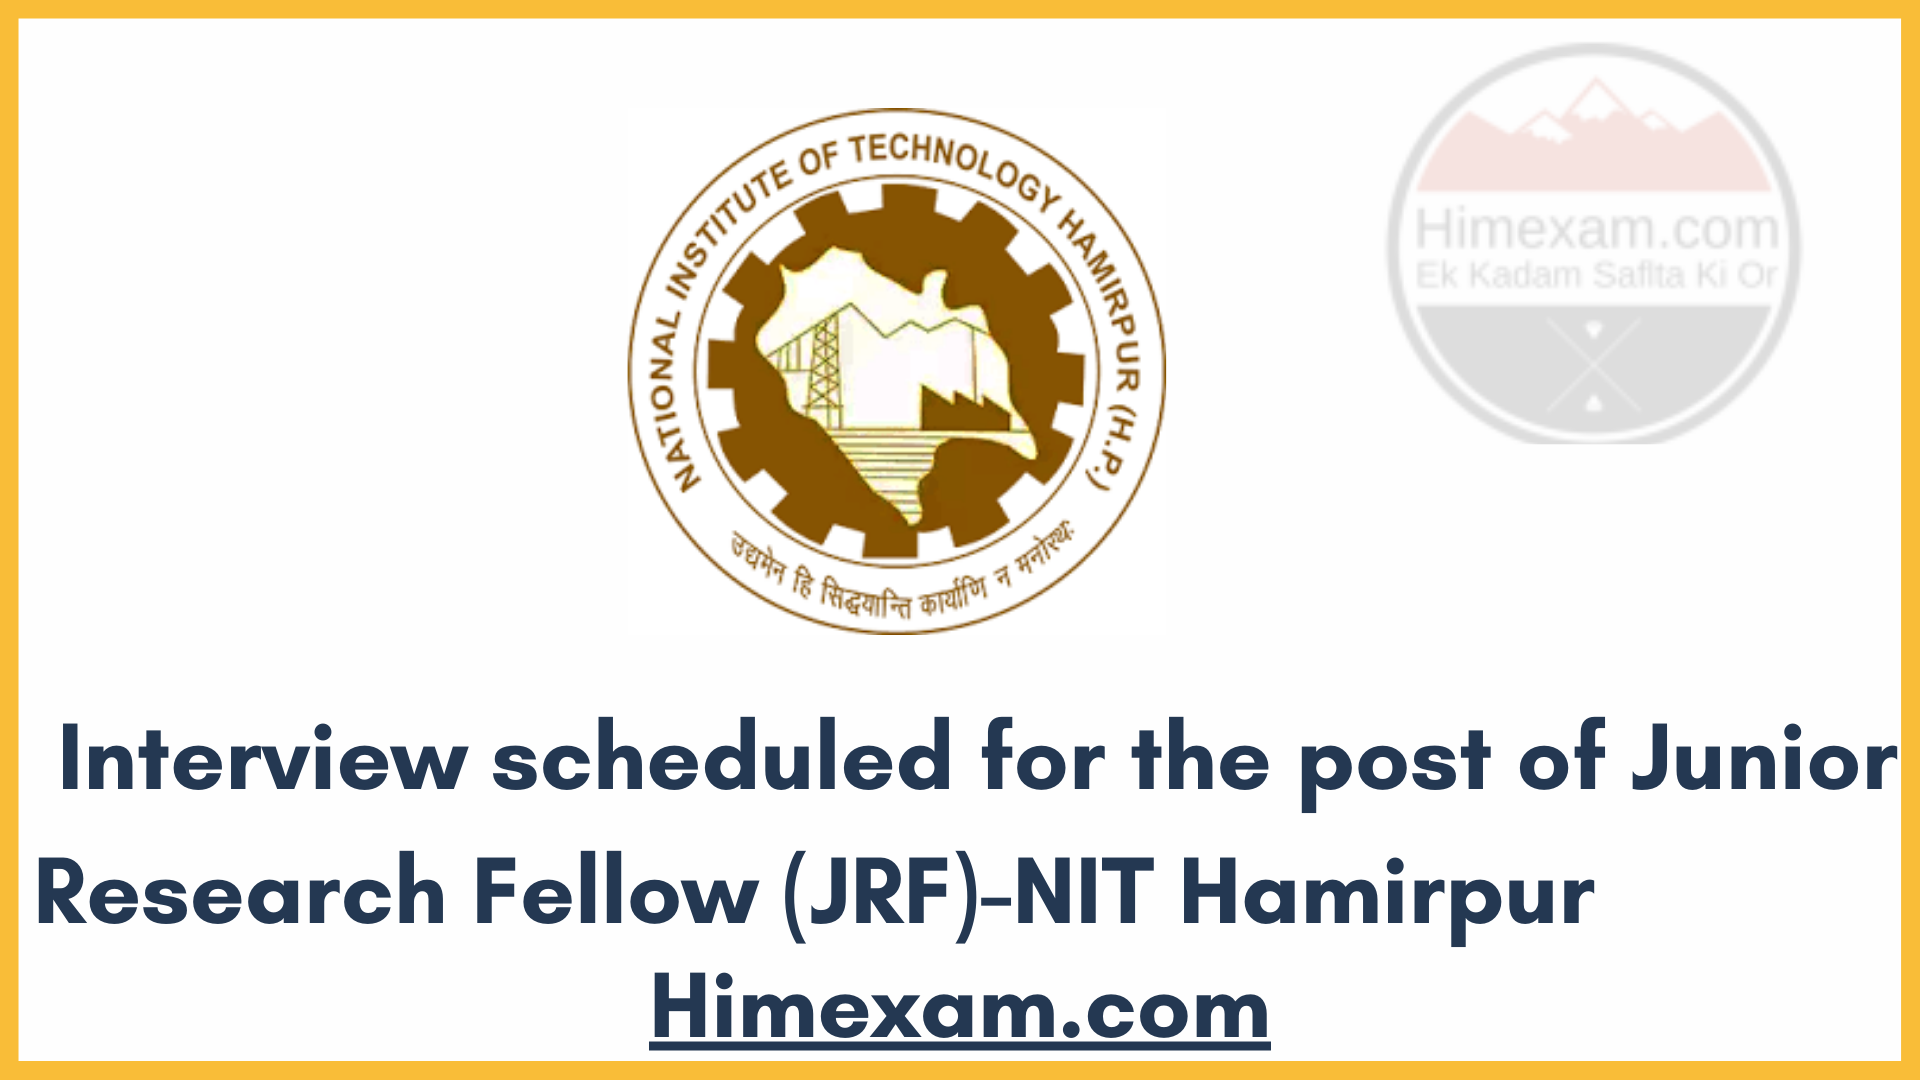 Interview scheduled for the post of Junior Research Fellow (JRF)-NIT Hamirpur